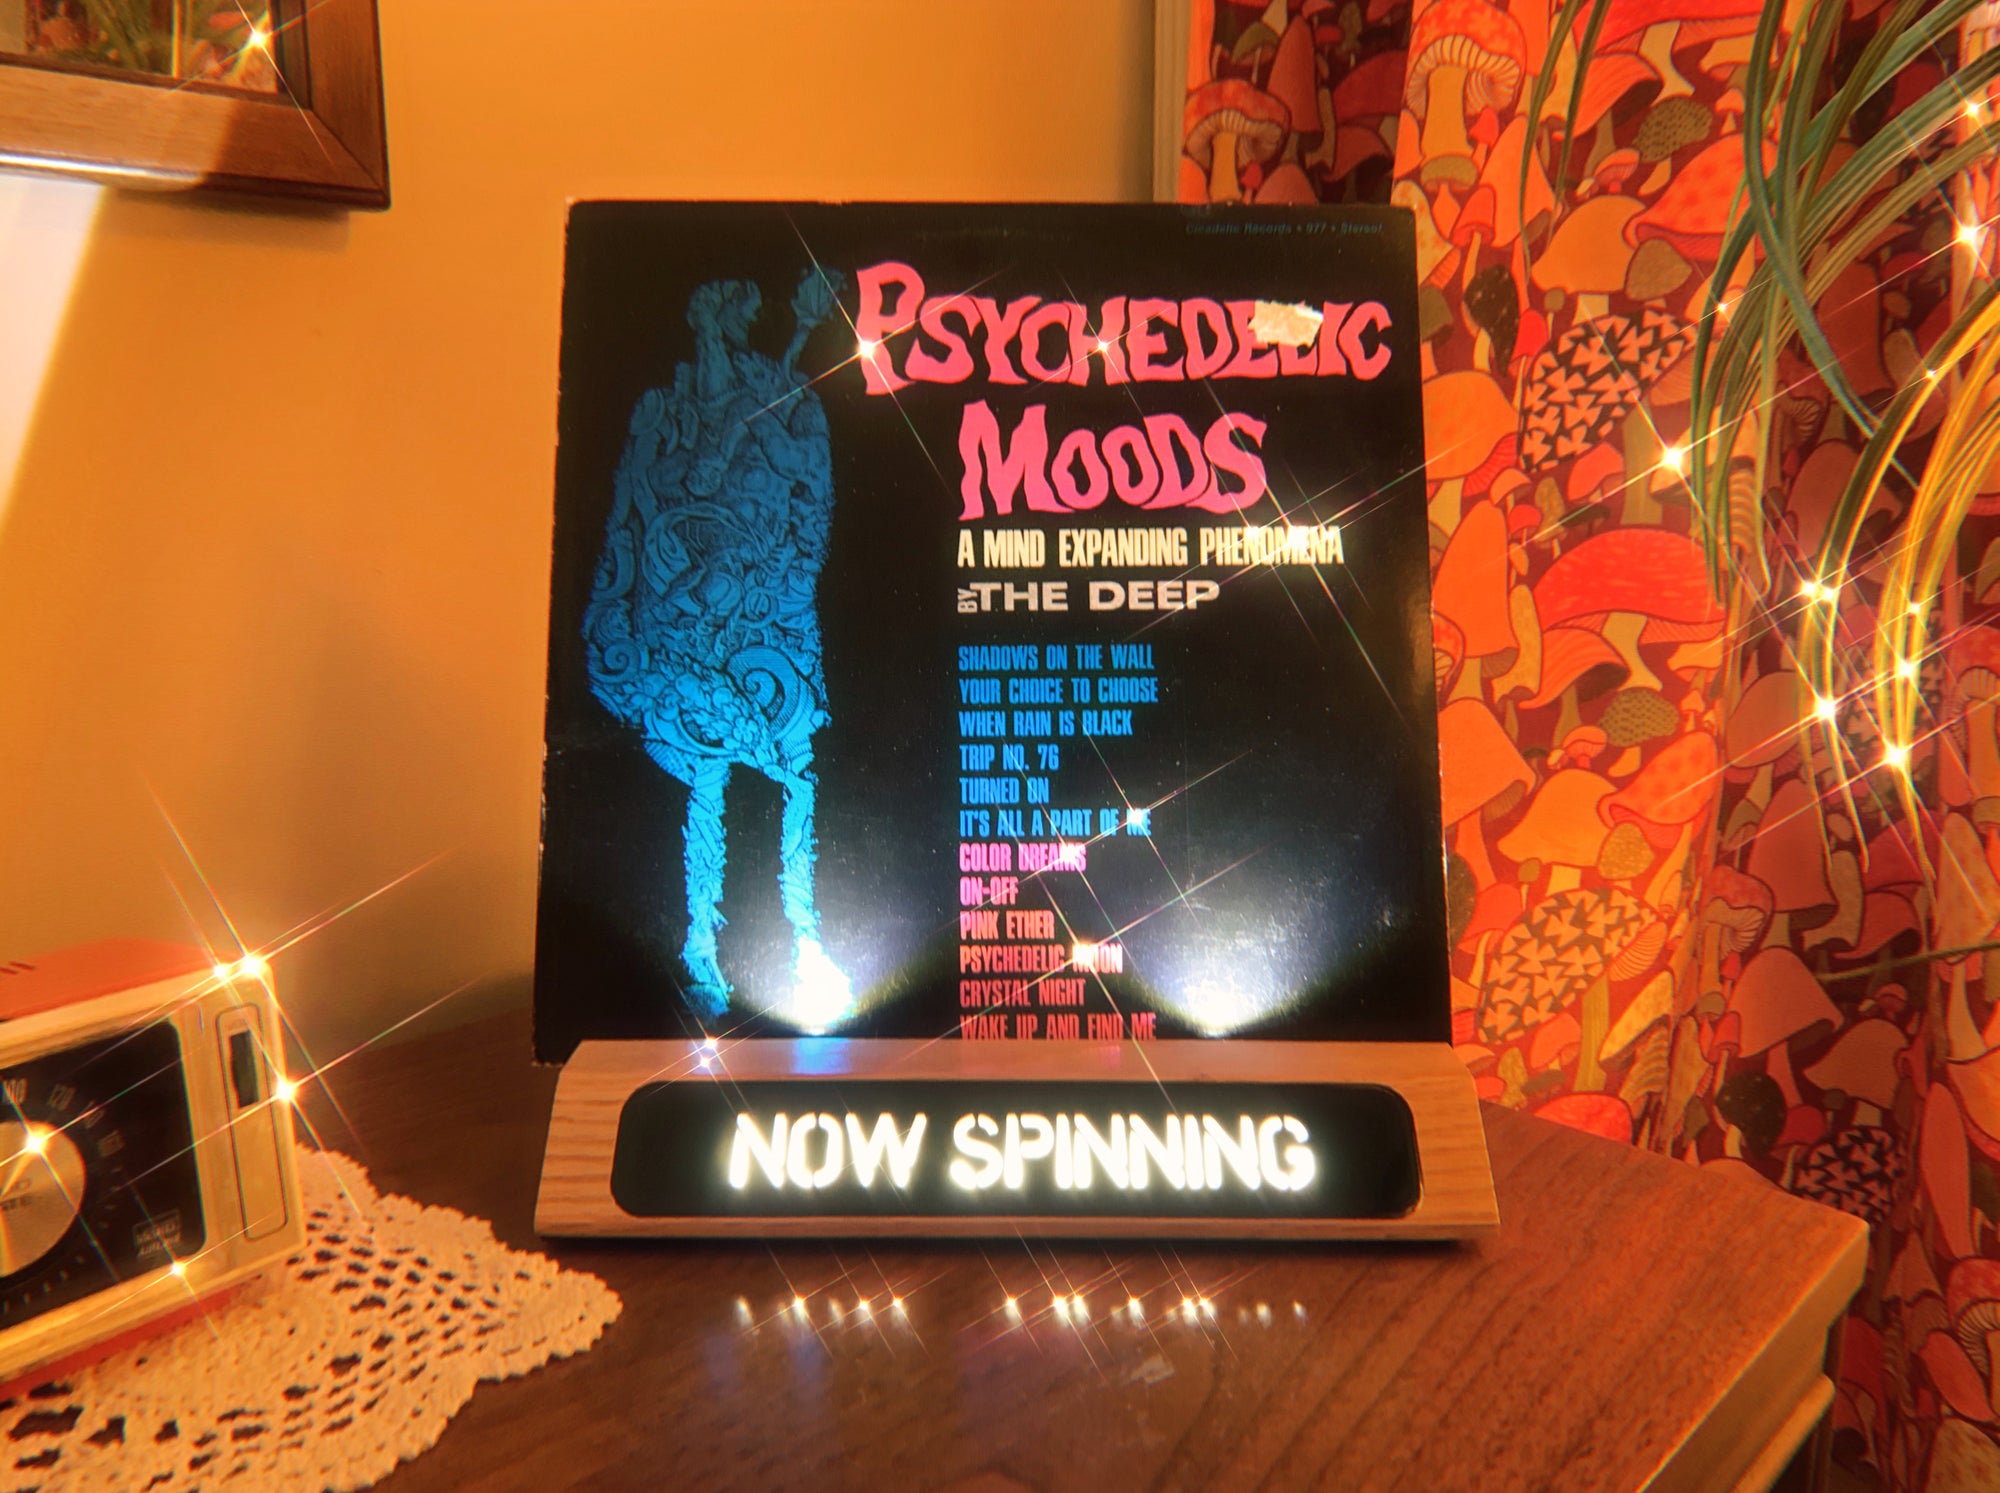 Vinyl-a-Day 41: The Deep - “Psychedelic Moods: A Mind Expanding Phenomena” (Cameo-Parkway, 1966)